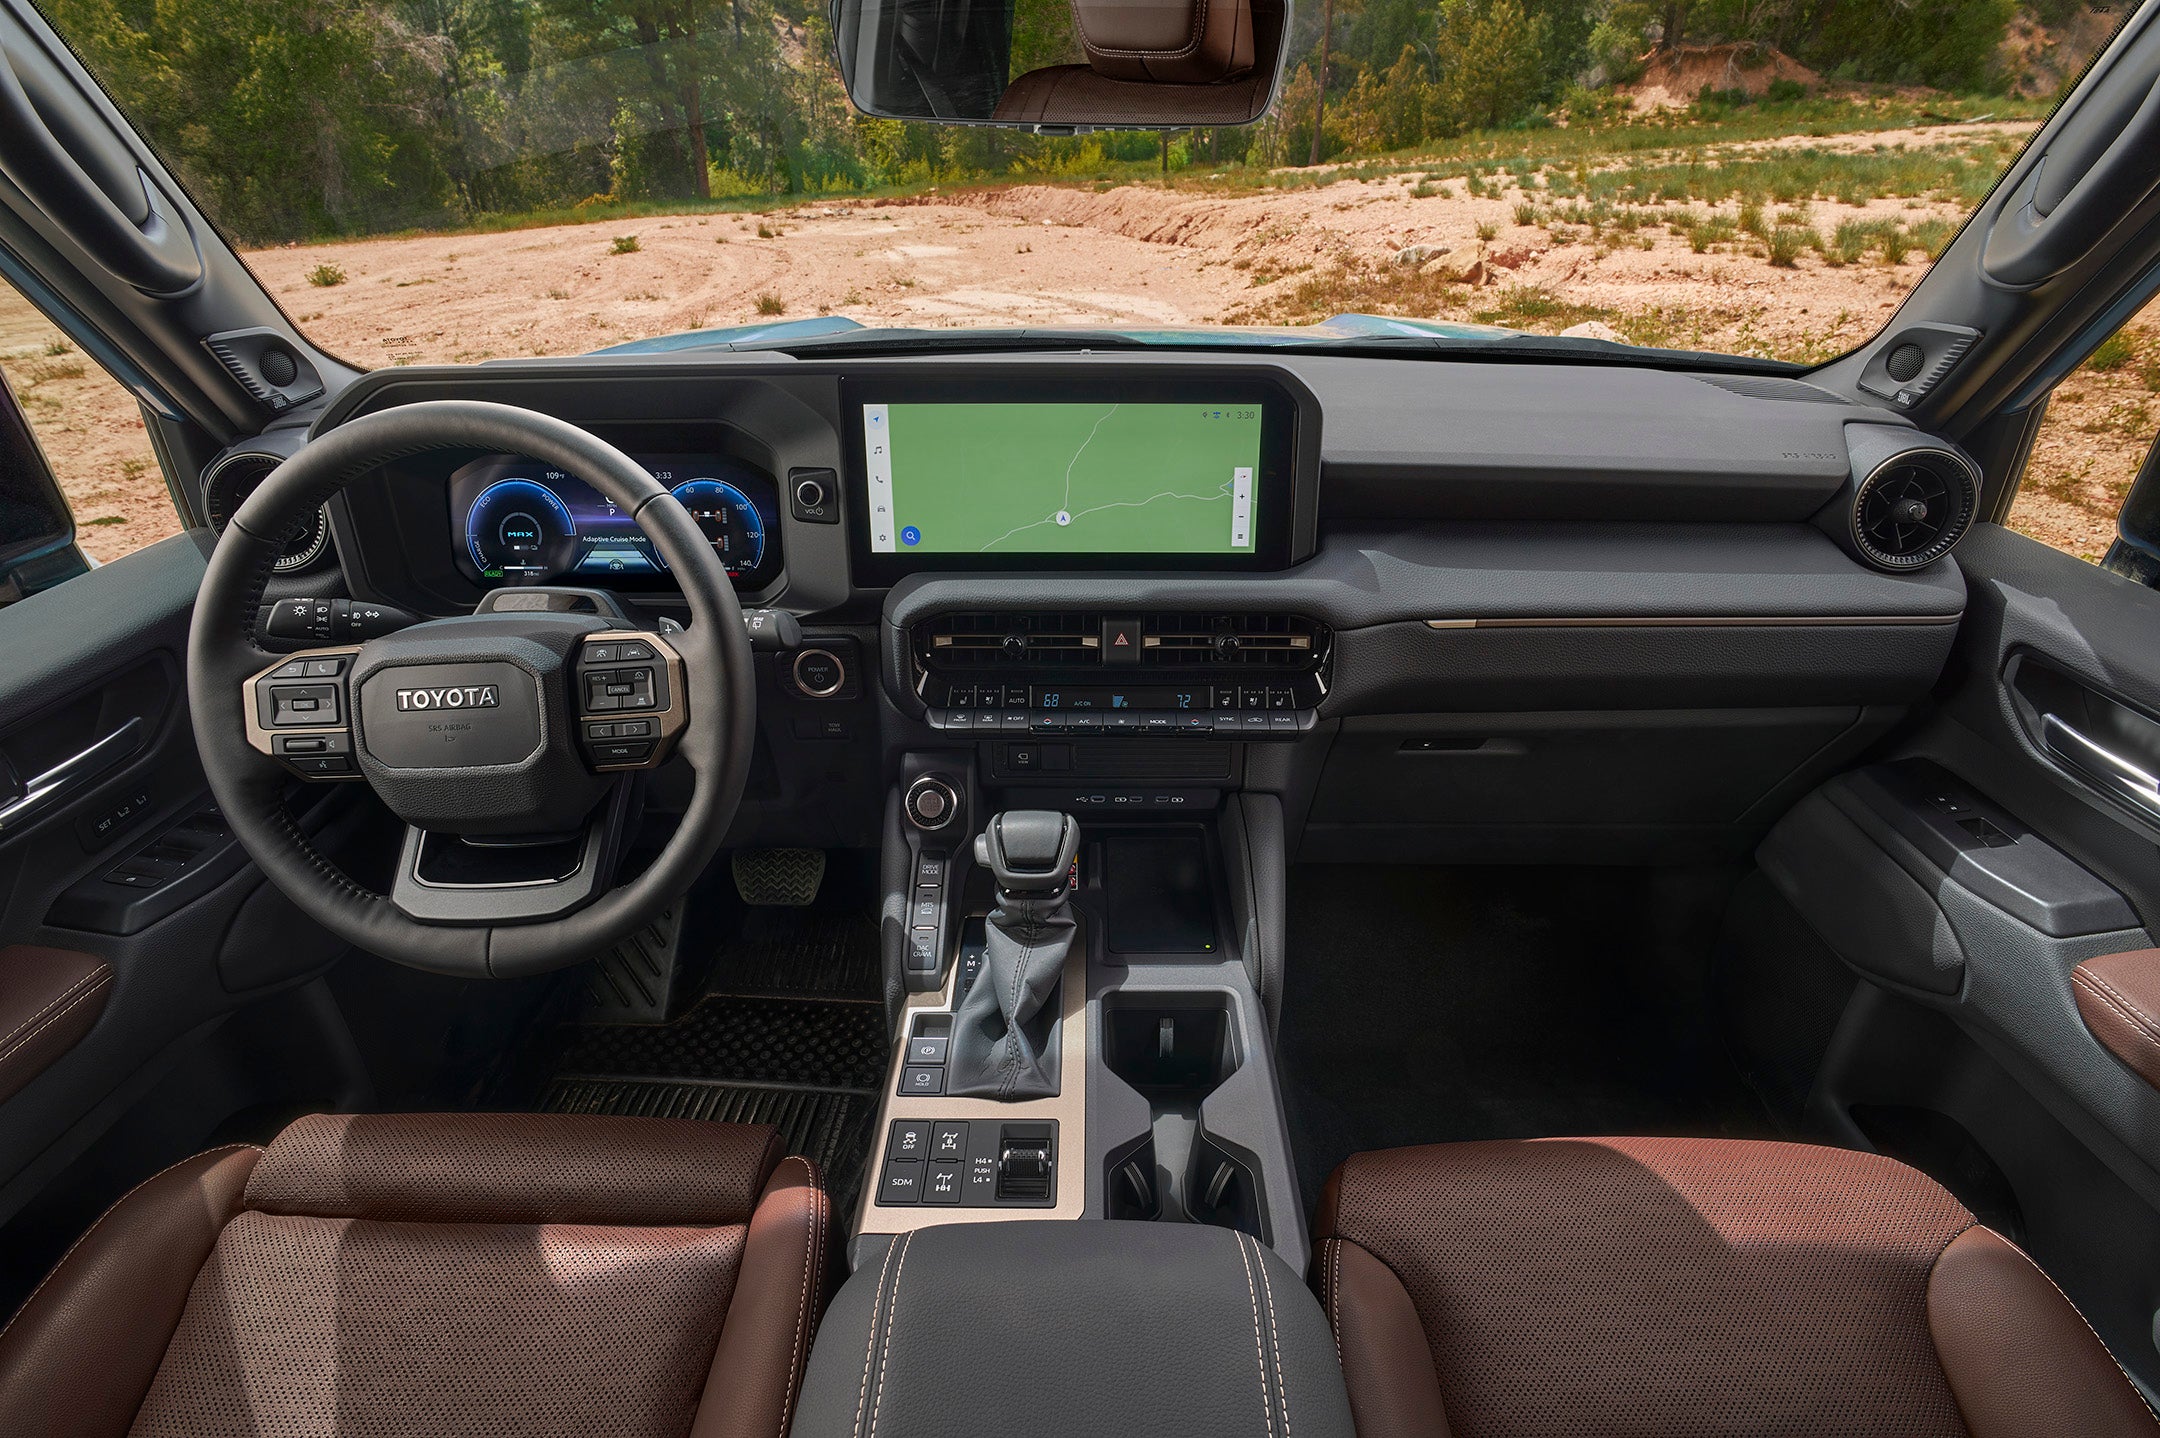 The Land Cruiser interior features seats trimmed in optional brown leather and a 12.3-inch touch screen.